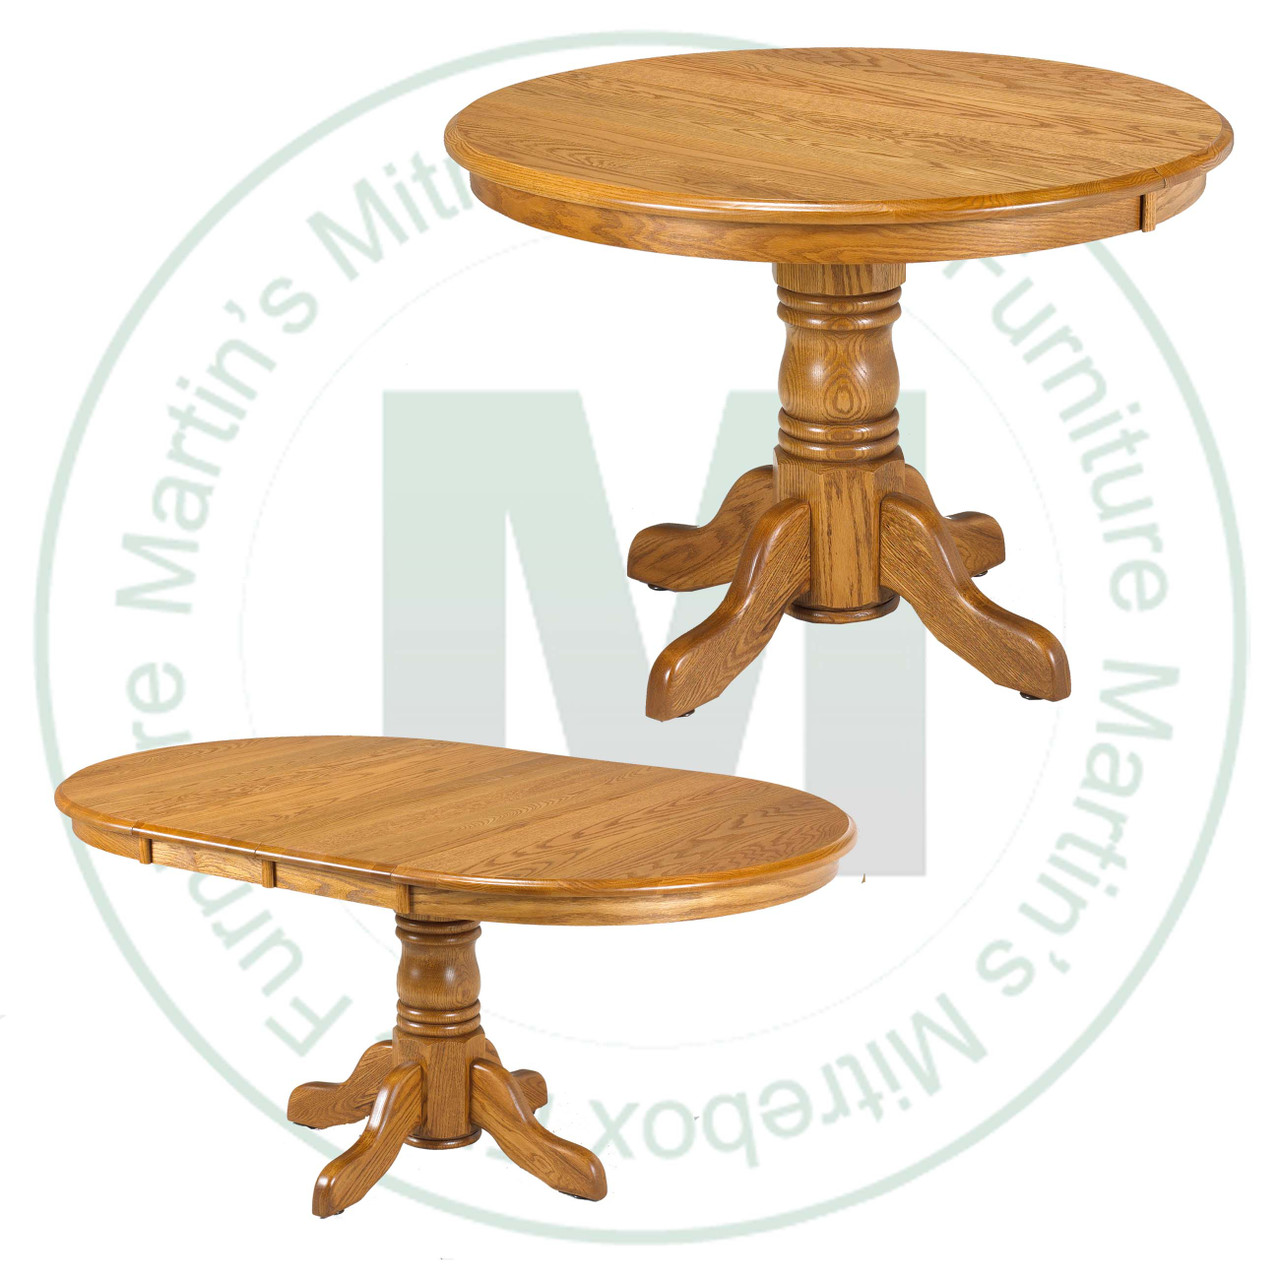 Wormy Maple Lancaster Collection Single Pedestal Table 36''D x 36''W x 30''H With 1 - 12'' Leaf. Table Has 1.25'' Thick Top